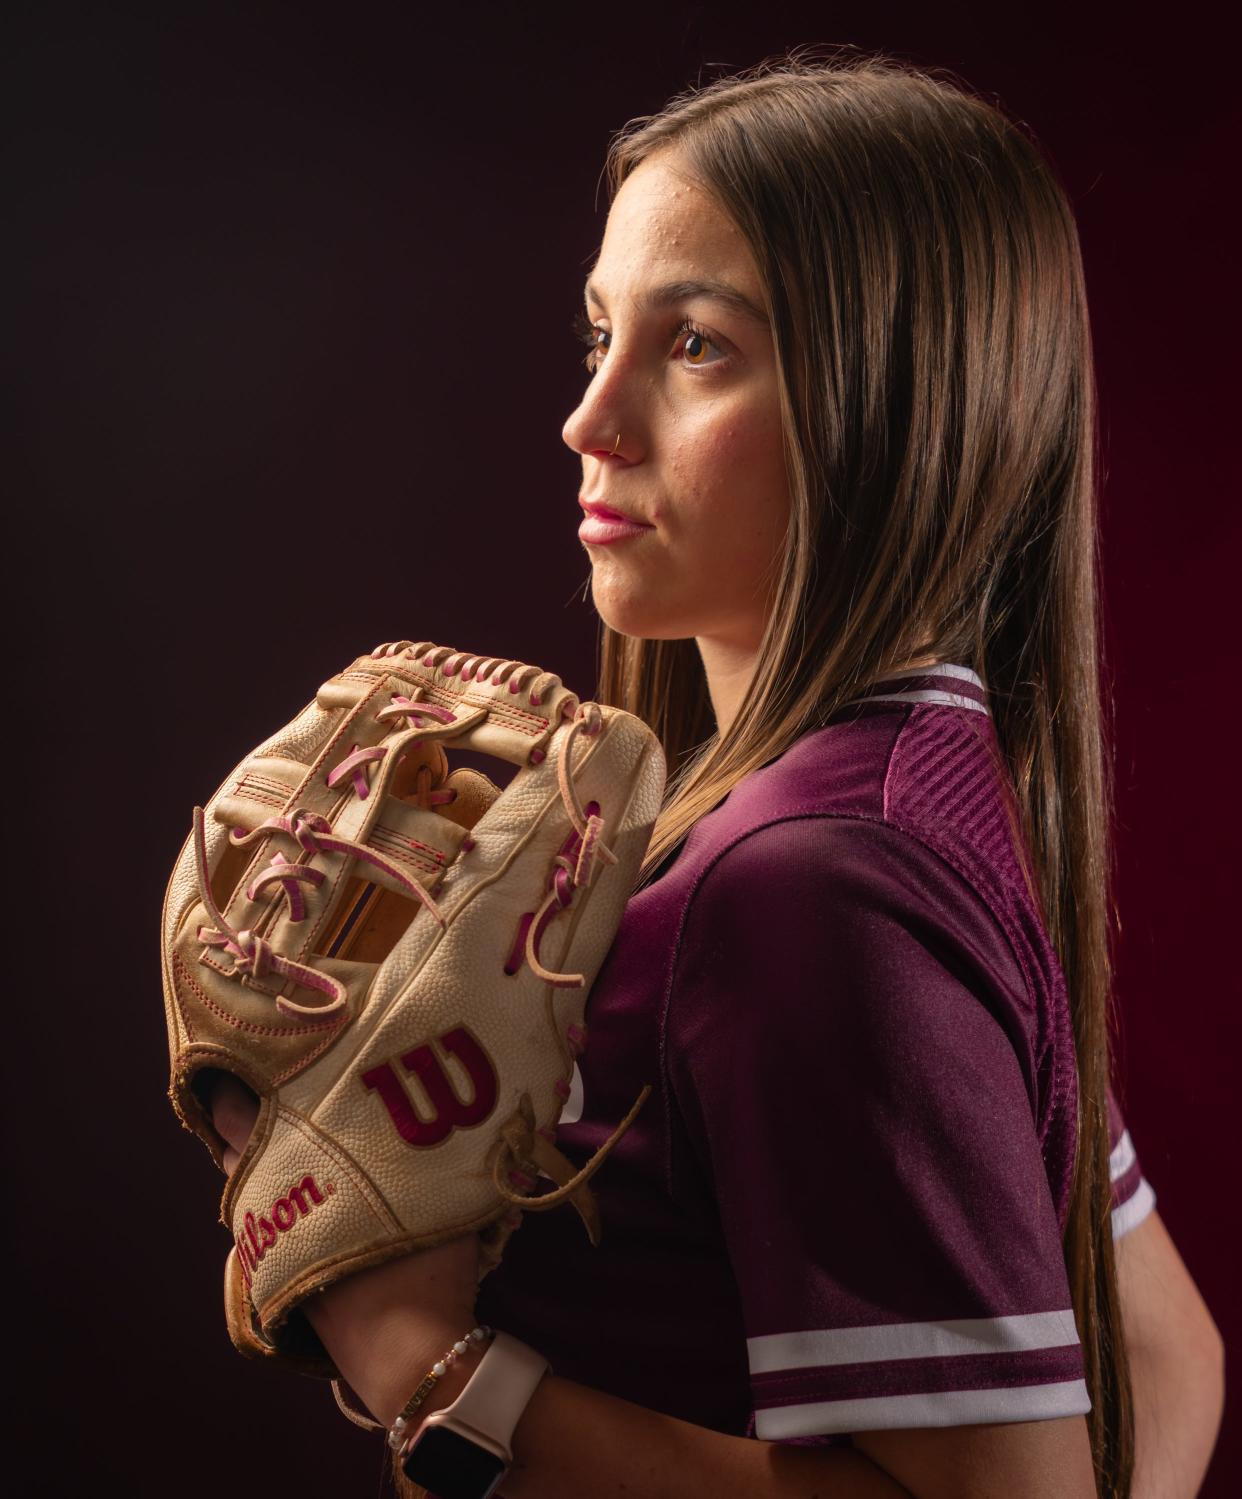 Round Rock shortstop Brantley Lavas says that diving for a catch or making a throw on the run are her favorite plays. "I feel defense is where the game happens," she said.